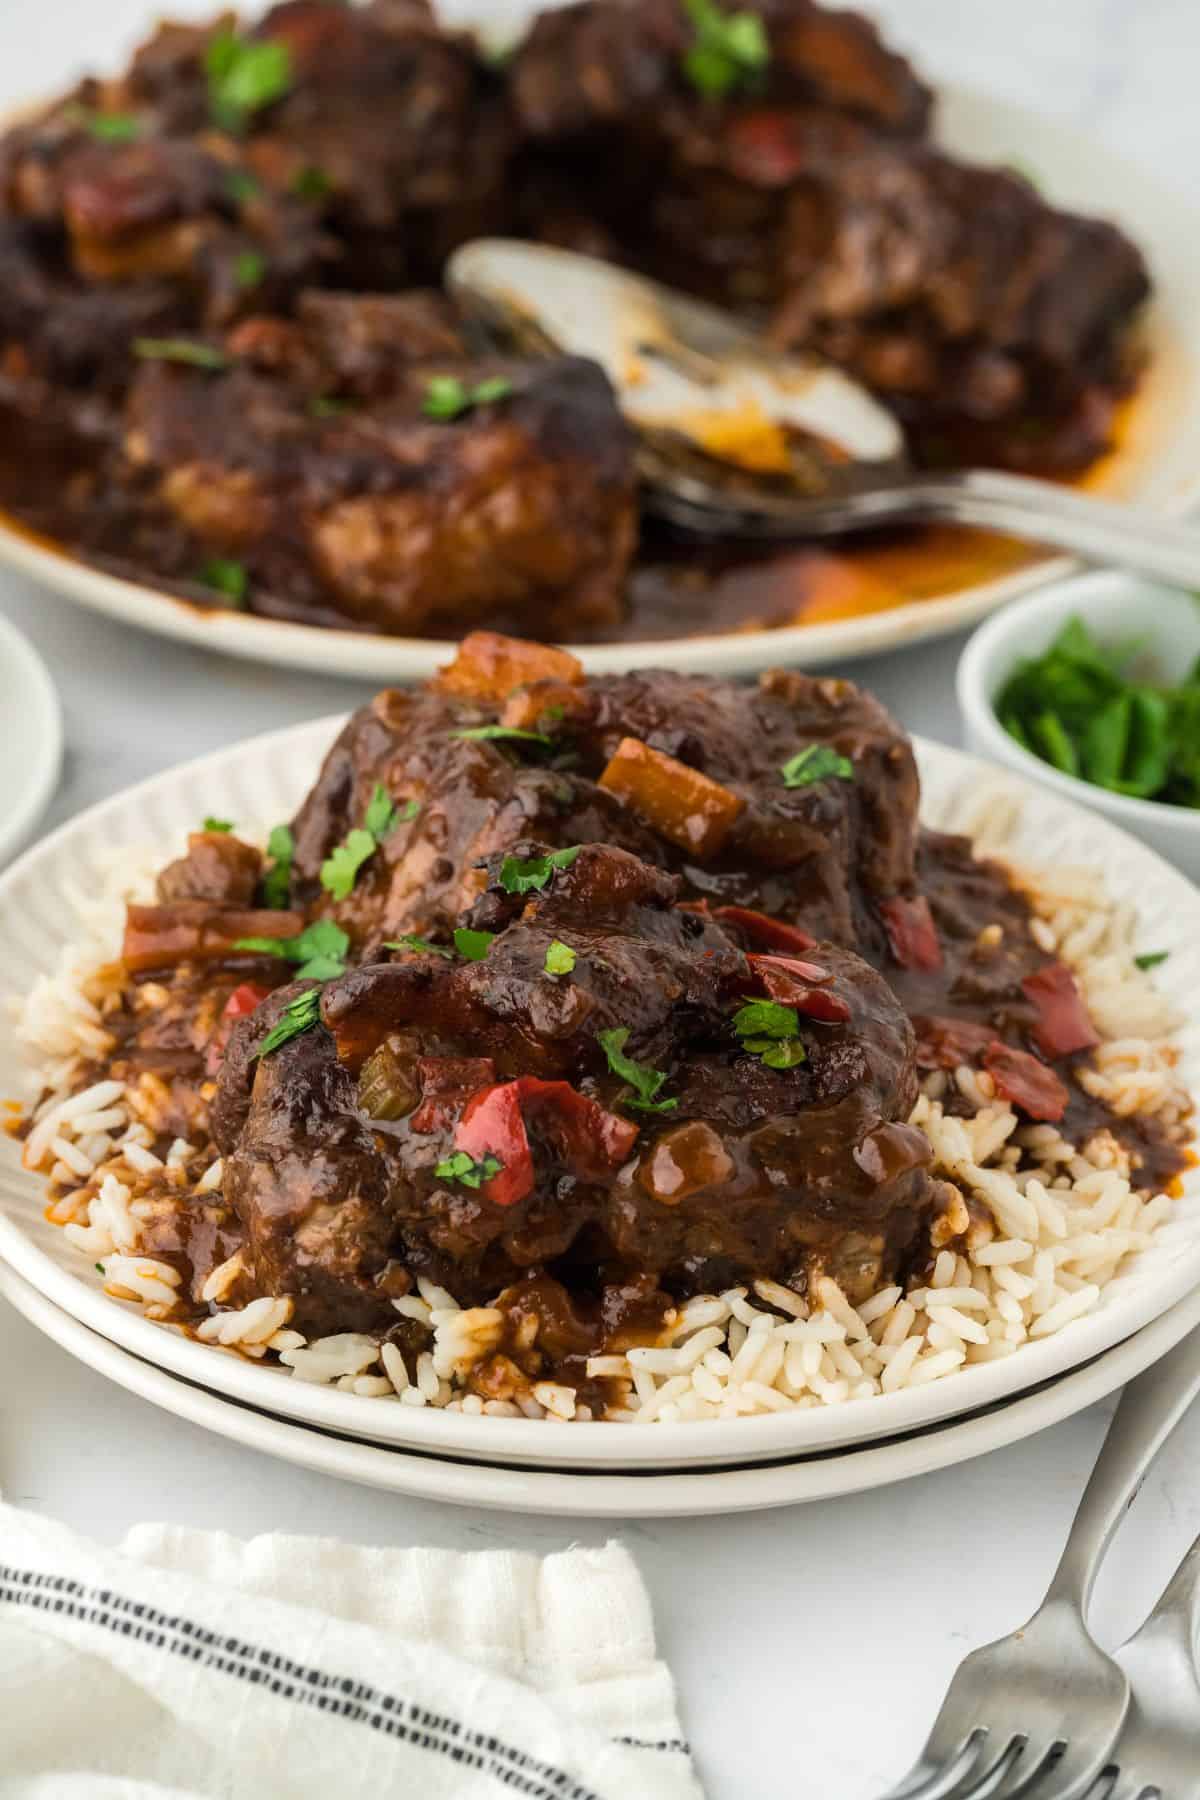 A plate of Jamaican oxtail stew over rice, with more oxtail pieces on a serving platter in the background and a bowl of parsley nearby